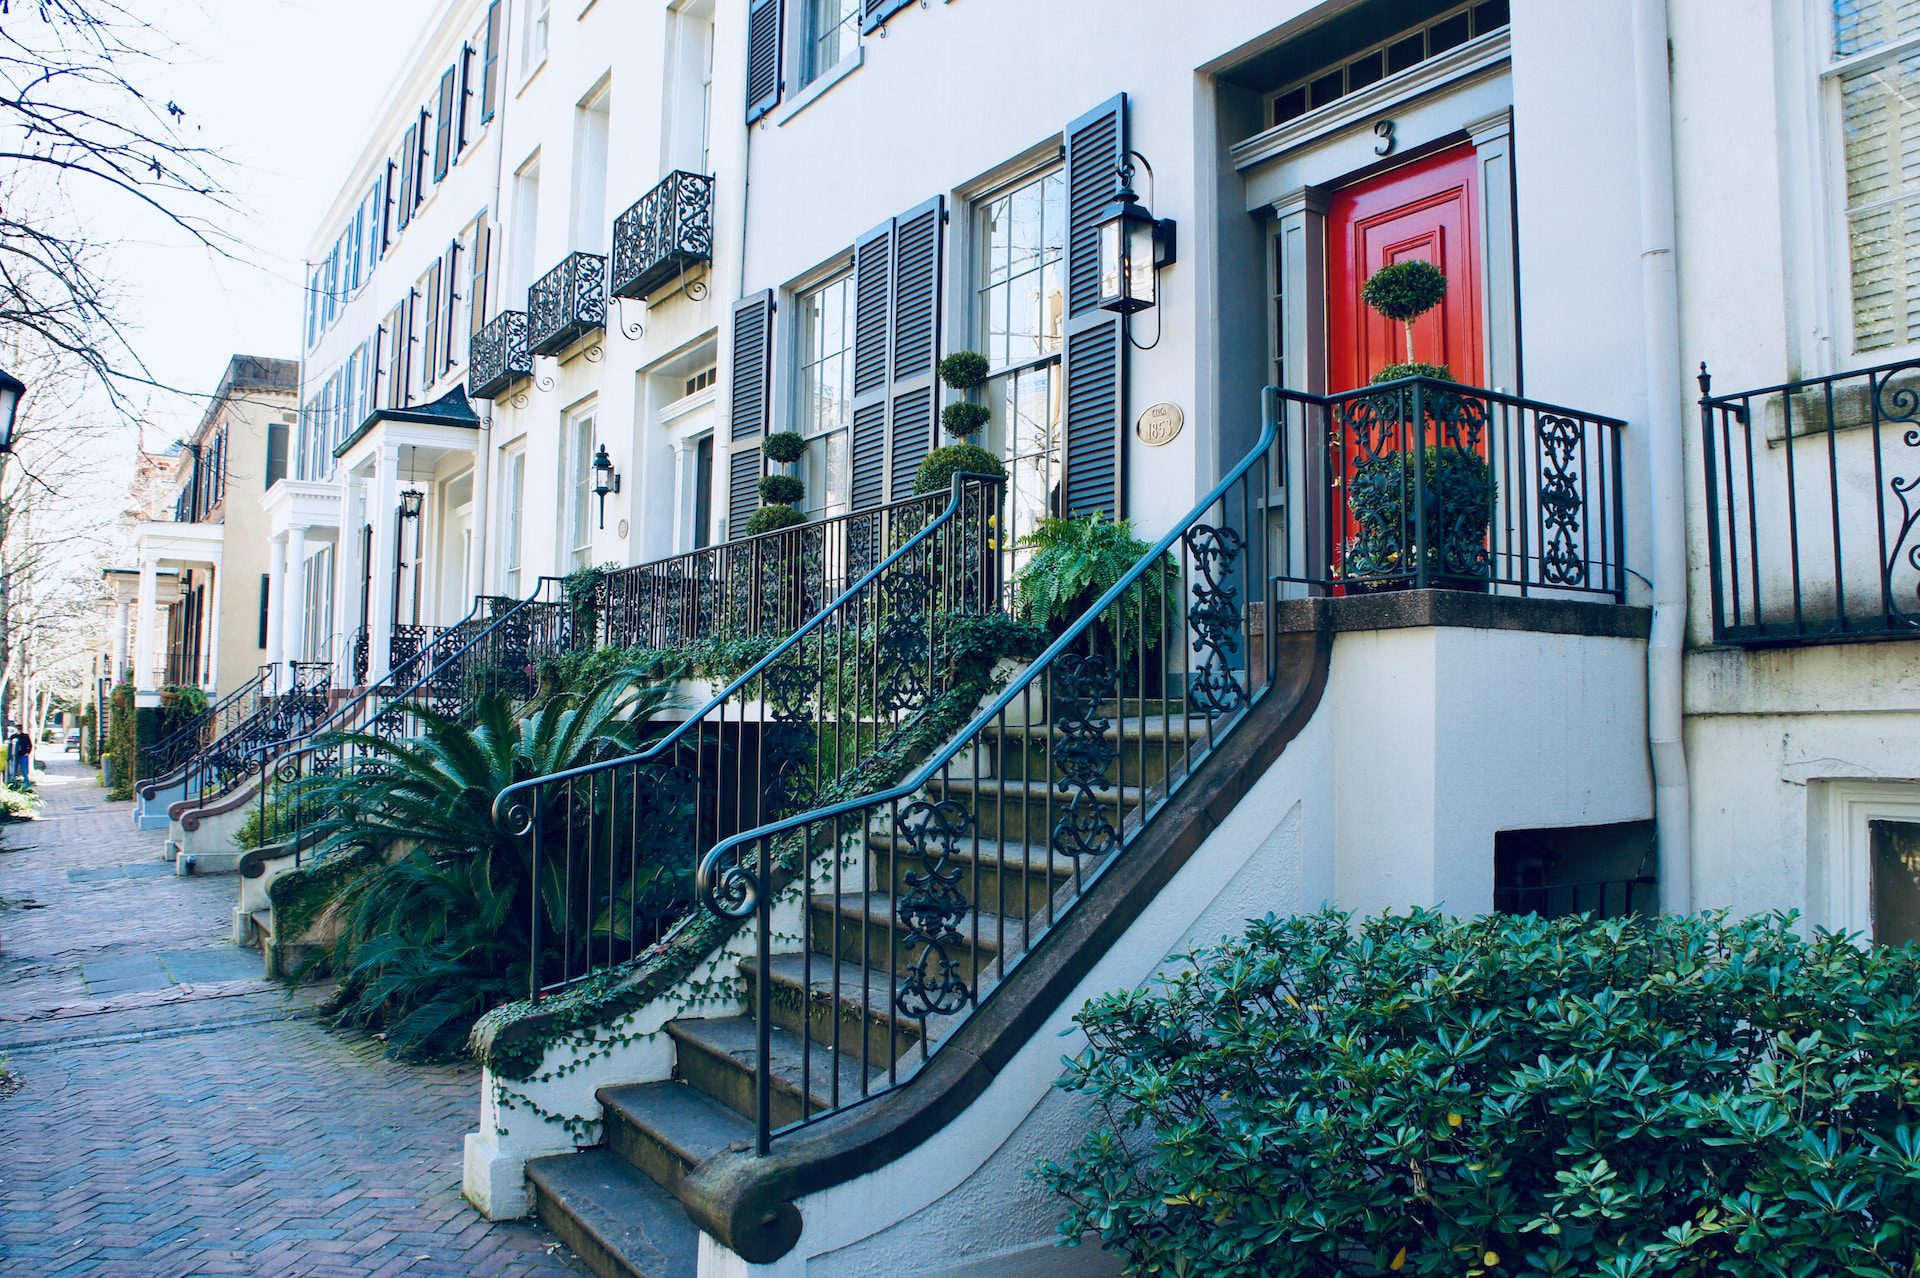 An old street in Savannah's Historic District with 19th-century homes lining the right side.